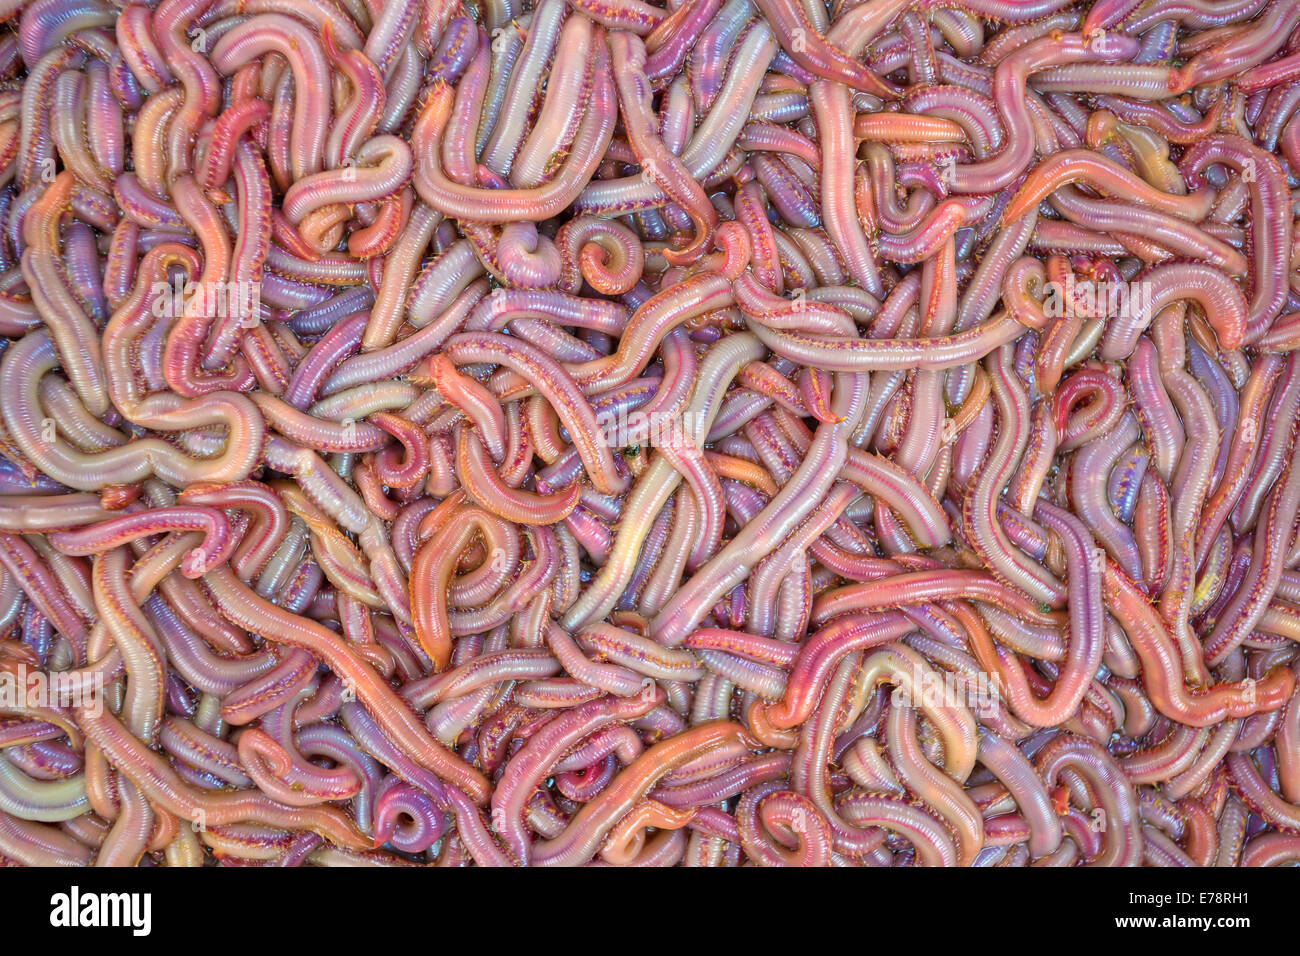 Fishing worms hi-res stock photography and images - Alamy